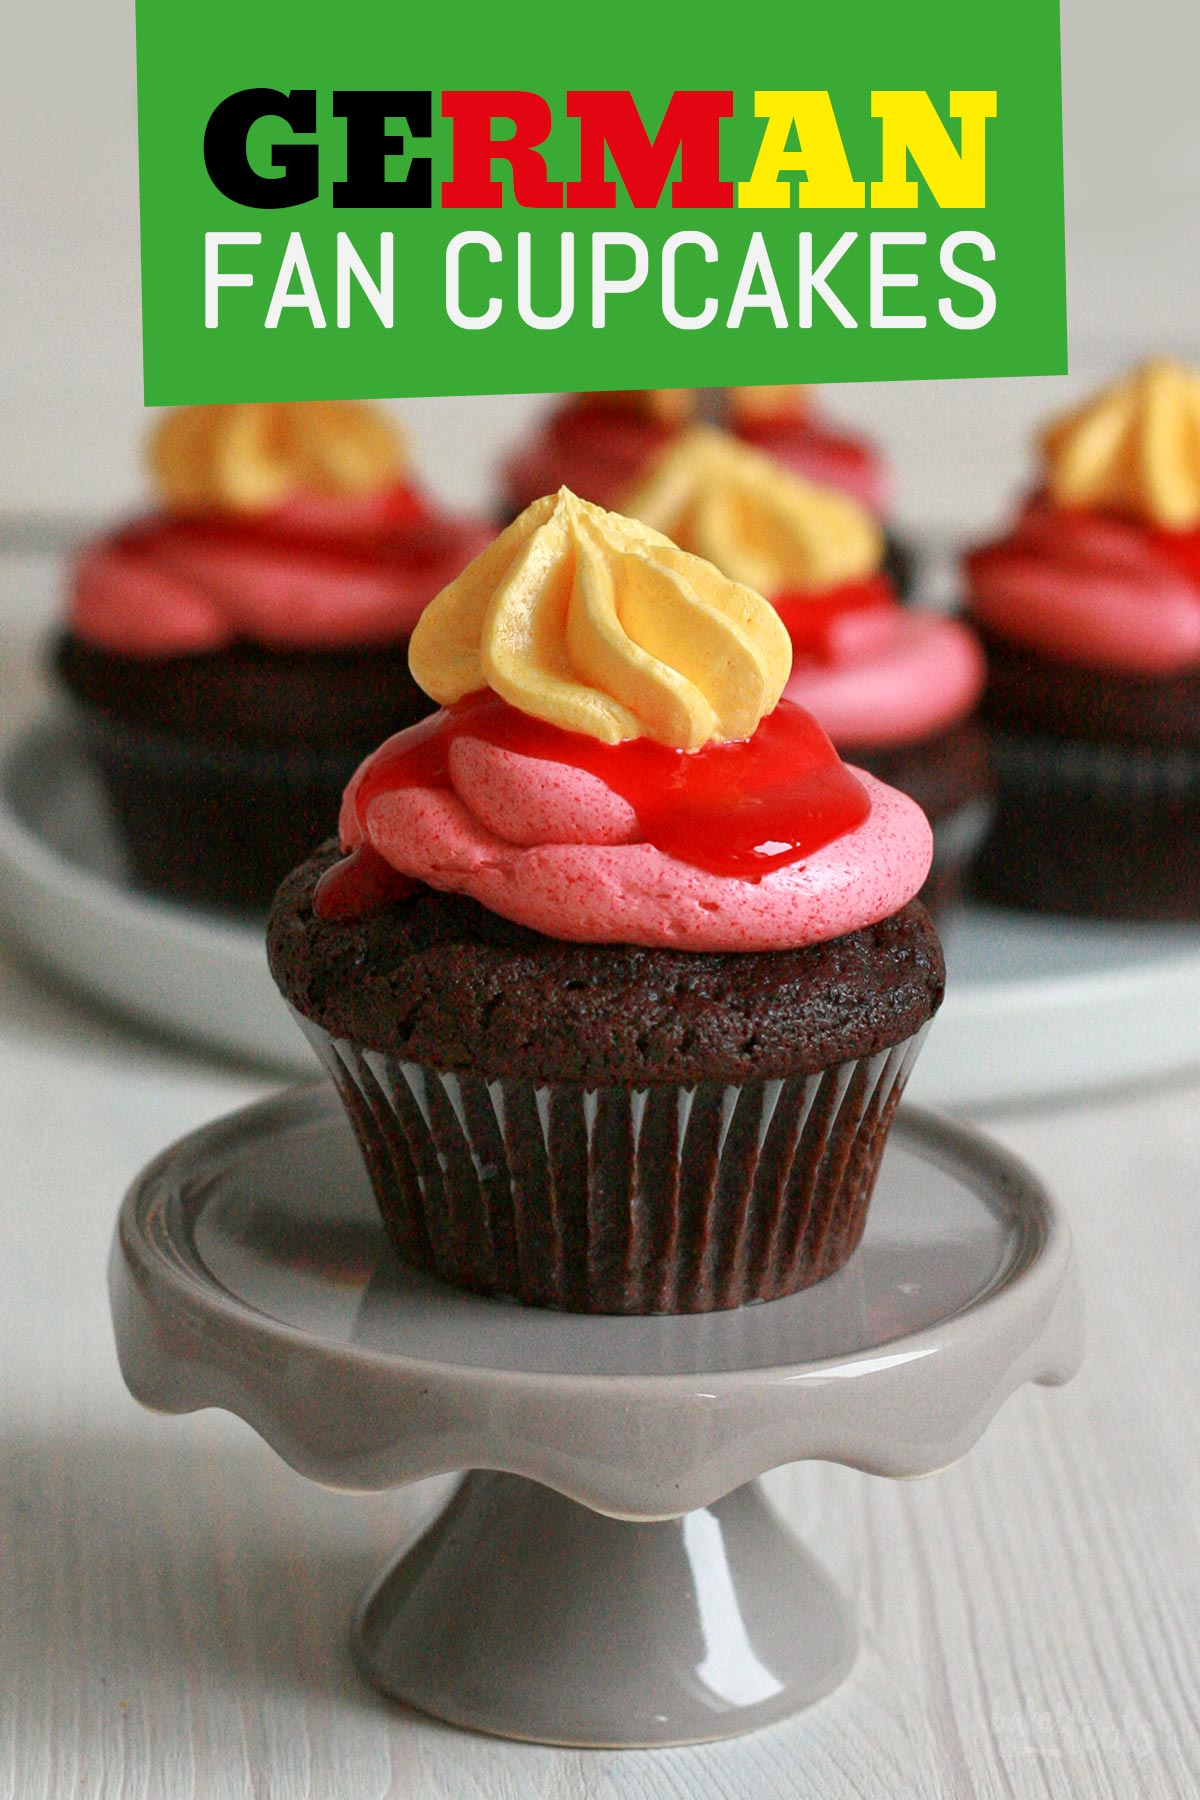 German Fan Cupcakes | Bake to the roots